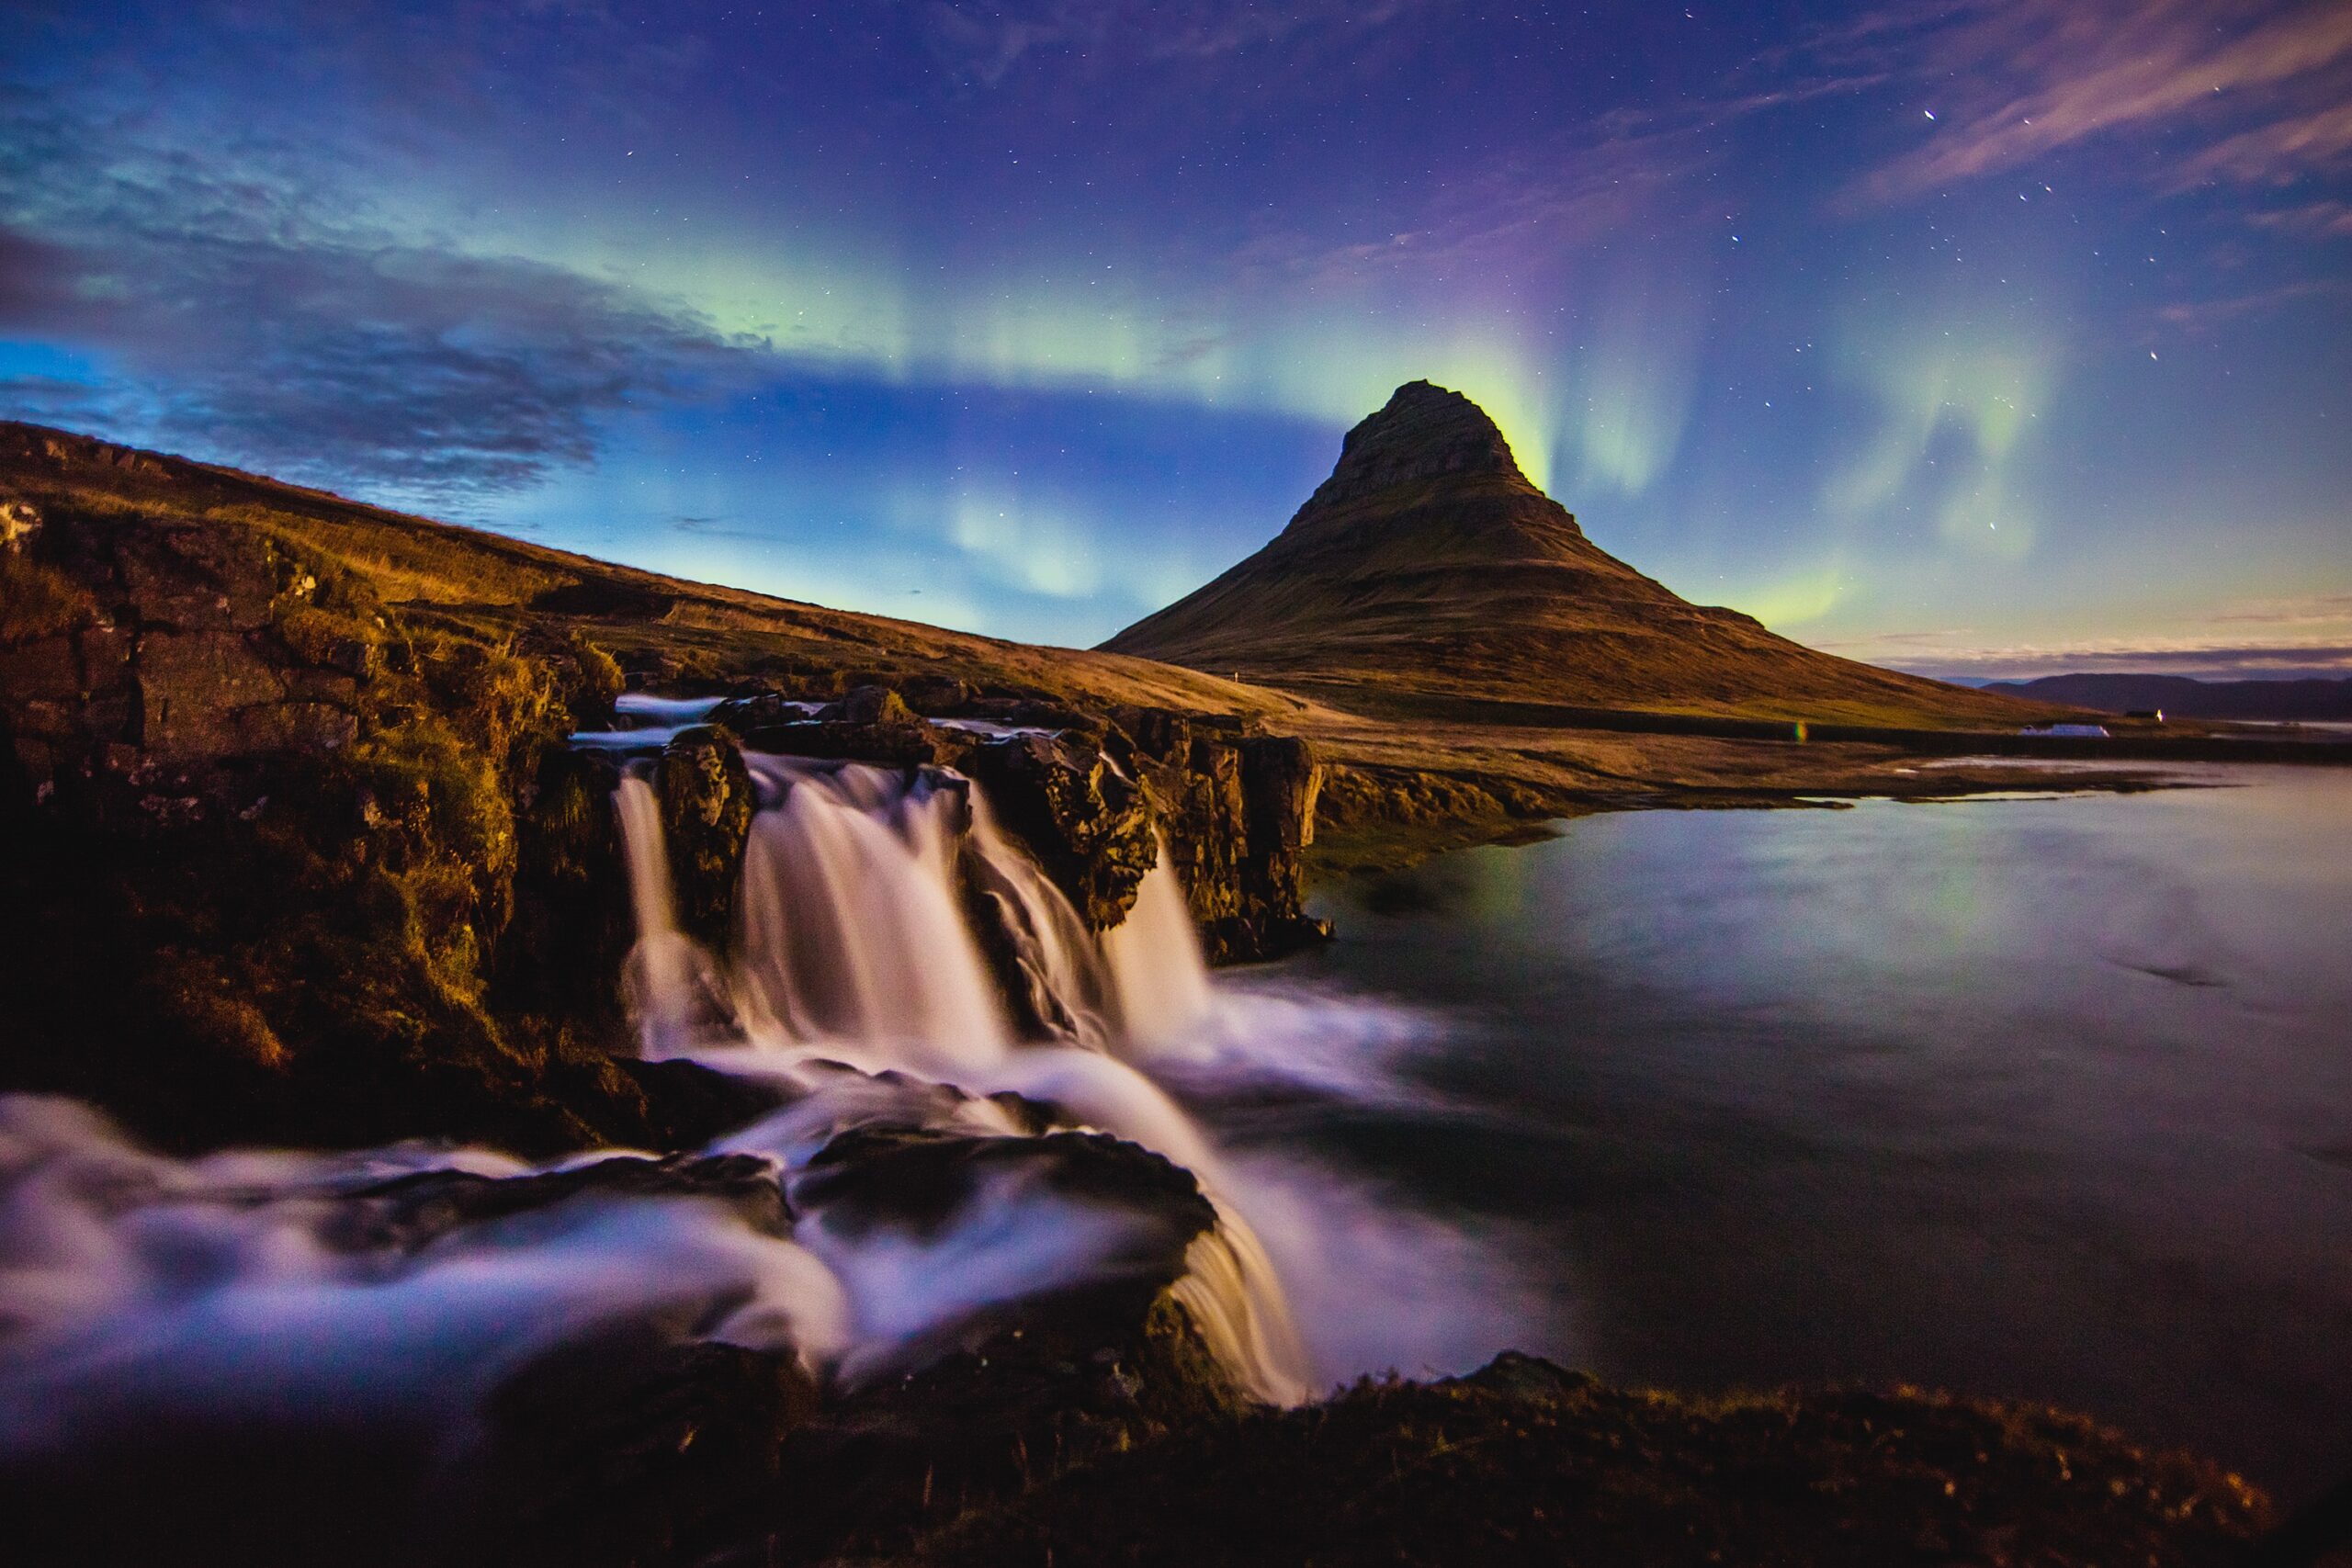 The Northern Lights can be seen above Kirkjufell peak in Iceland with a waterfall in the foreground